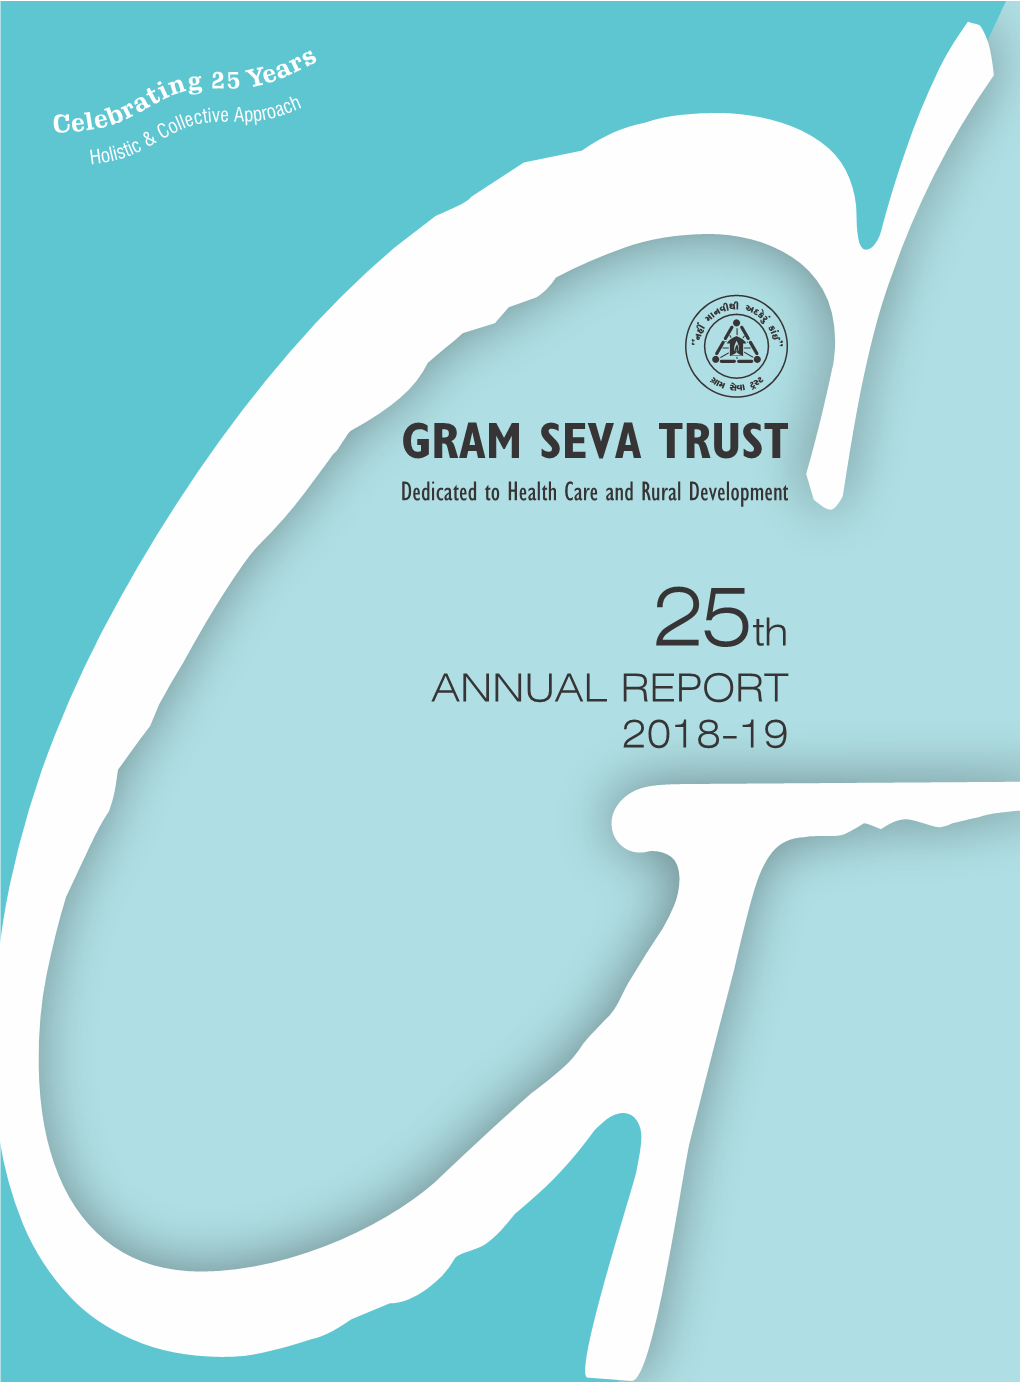 ANNUAL REPORT 2018-19 About the Organization This Logo Symbolizes the Objectives of the Organization